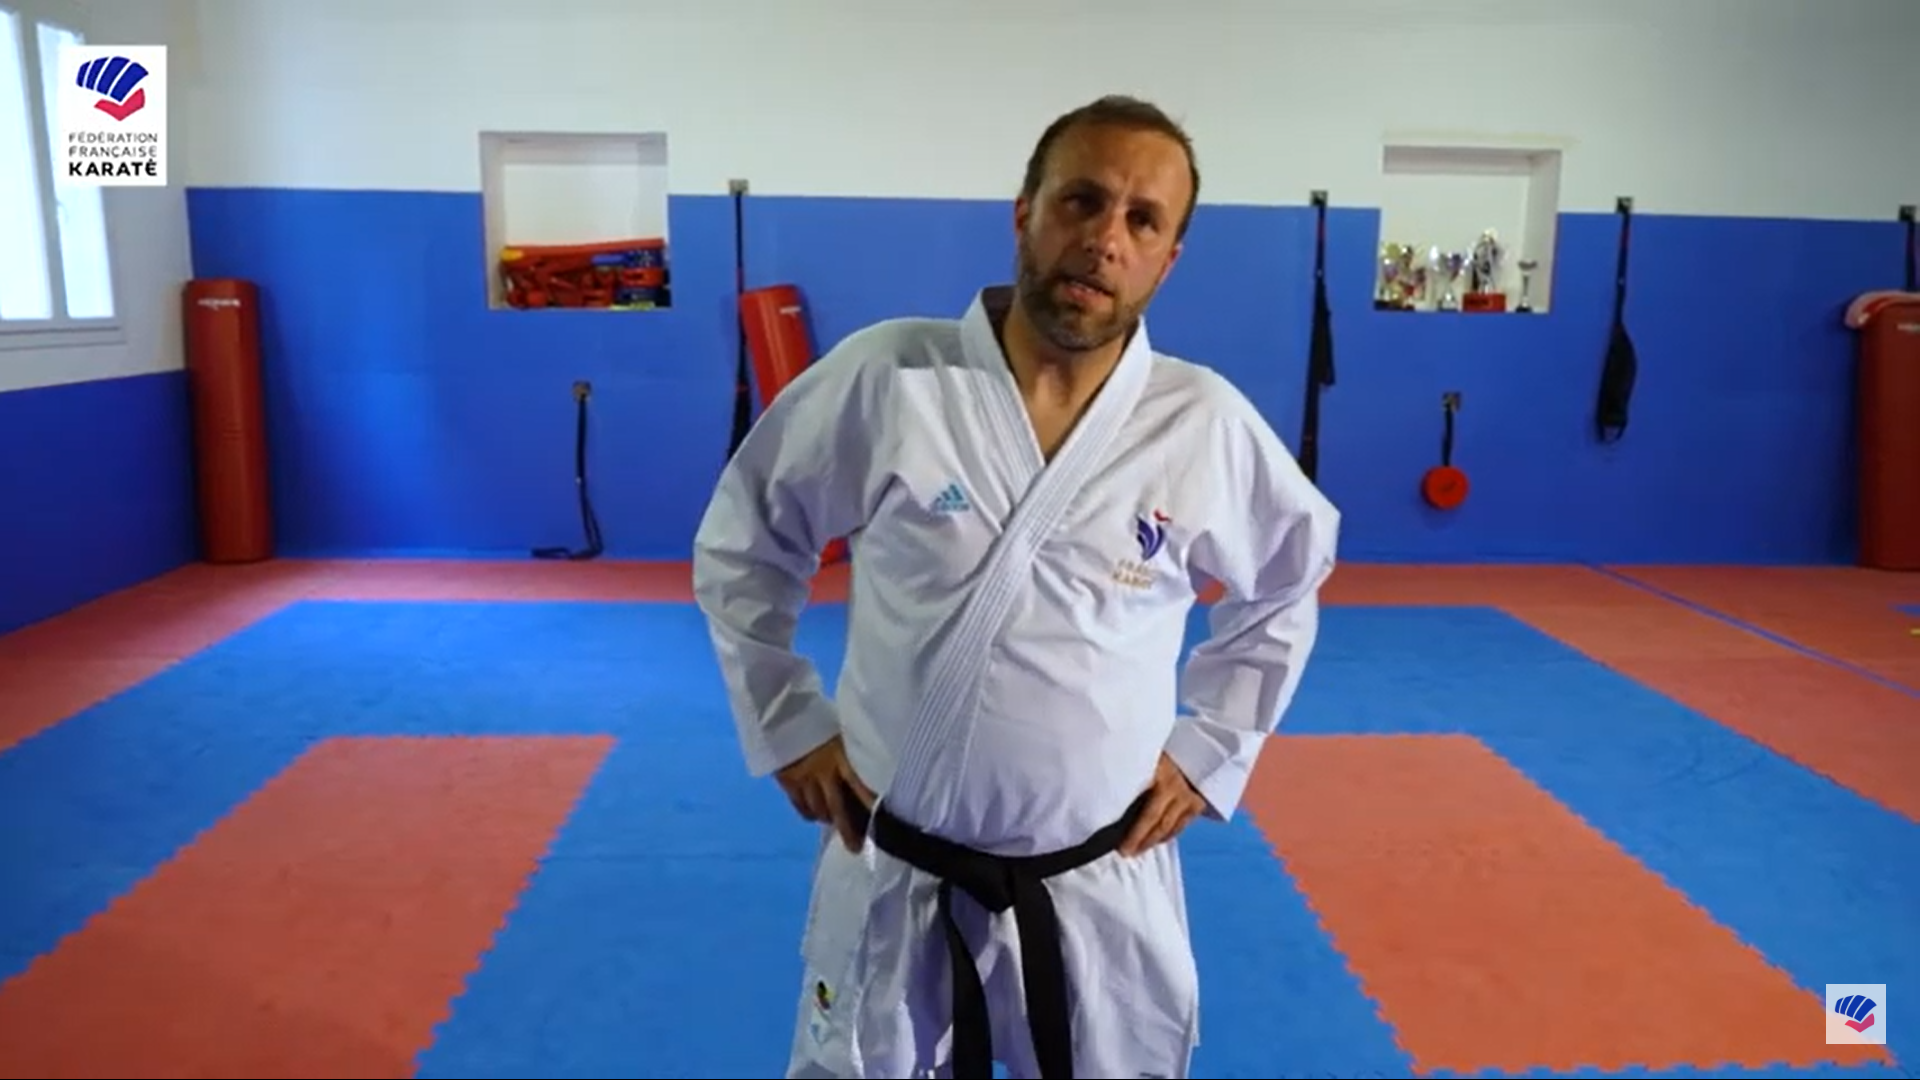 French coach and United States karate star produce home workout videos